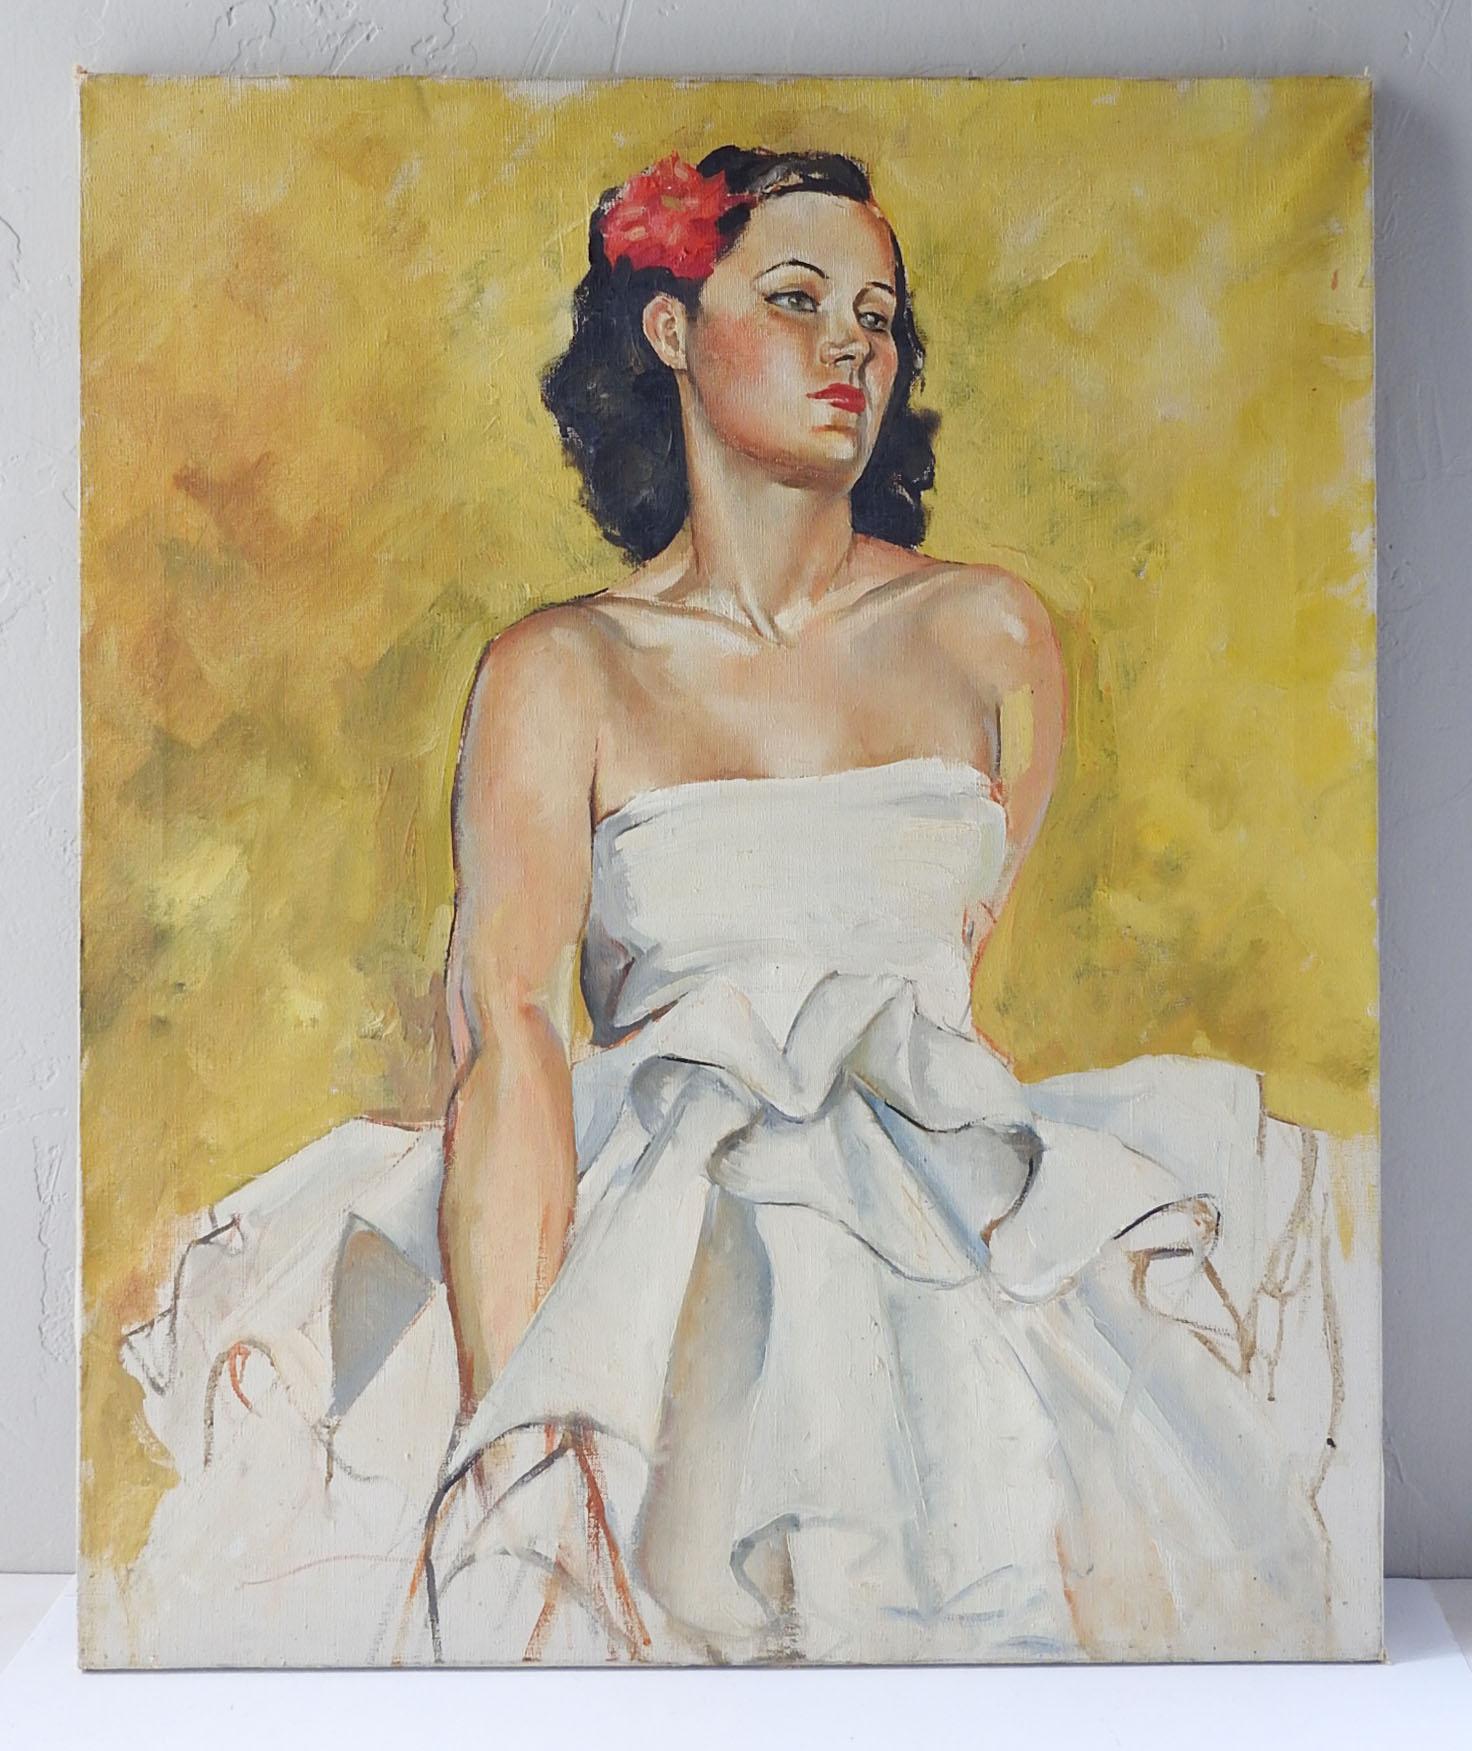 Vintage midcentury oil on canvas portait of young woman in ruffled strapless white gown. A red rose in her dark hair striking a daring pose. Unsigned, Daring written on verso, could be artist or title. Unframed, edge wear.